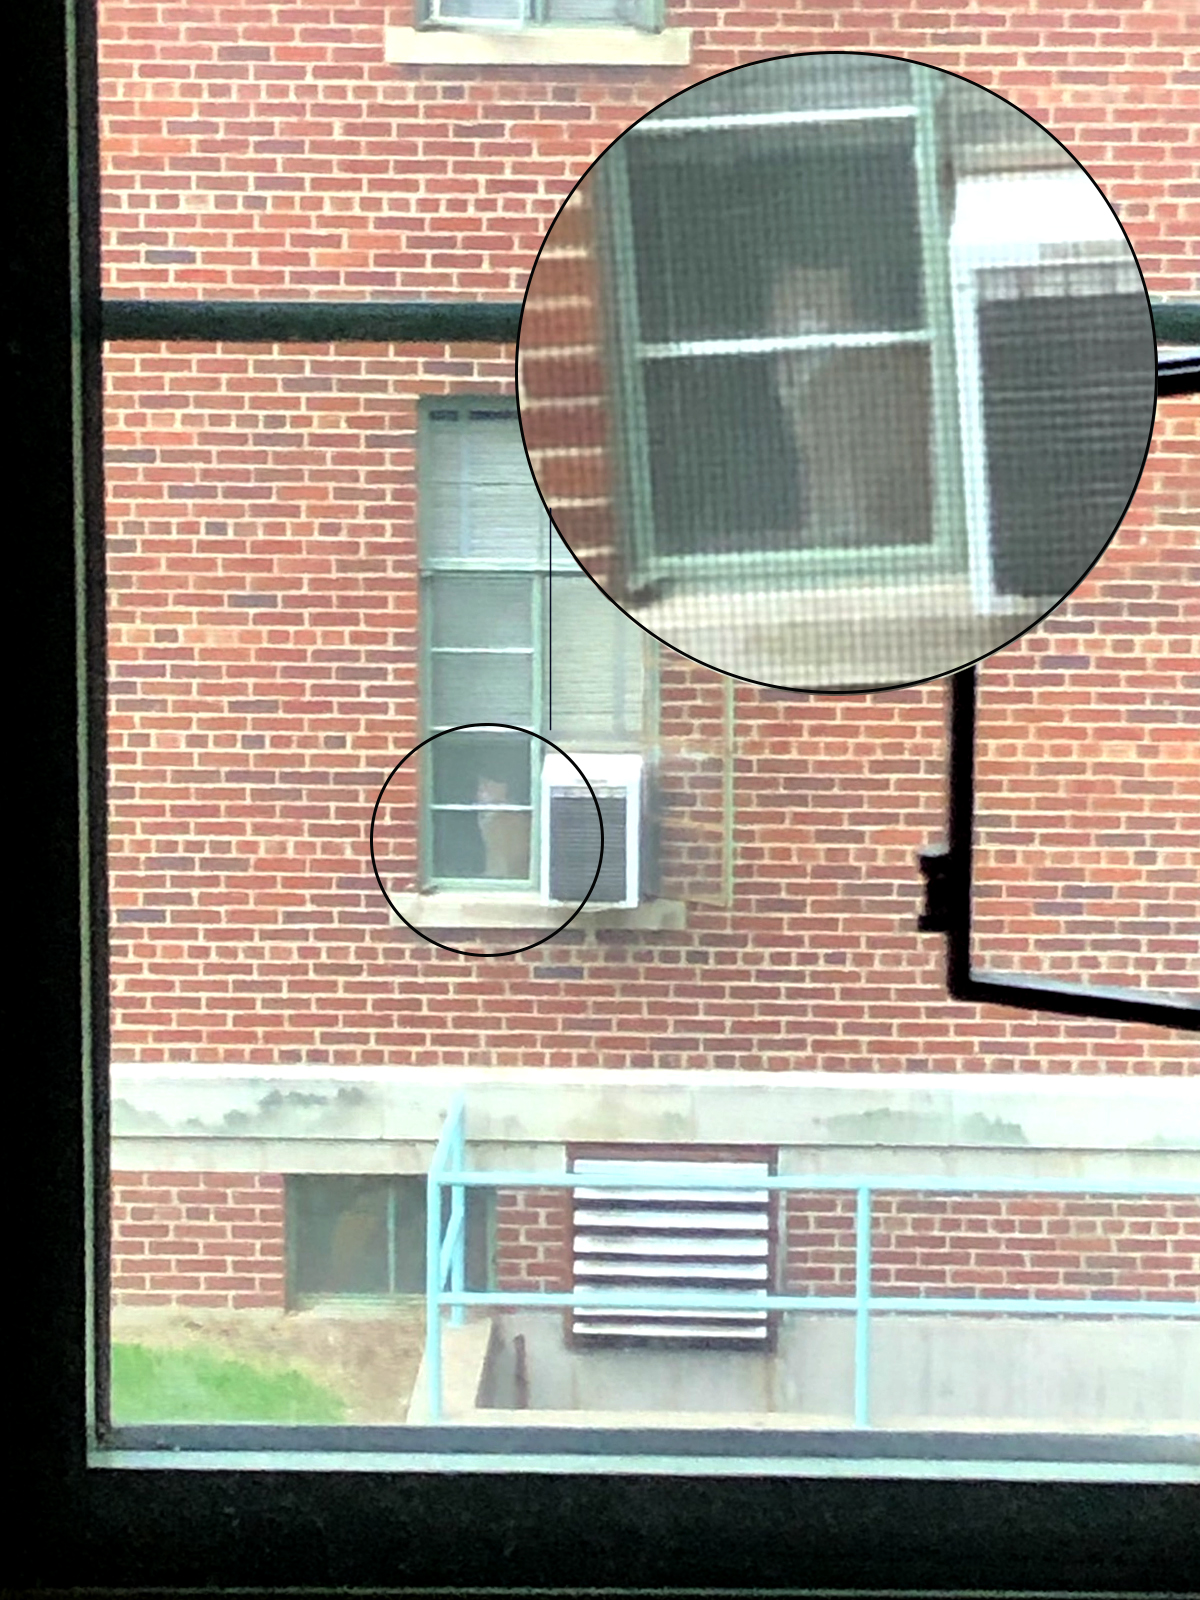 Image shows a cat sitting in a window of a brick building, with a circle and a zoomed in version of the photo within.